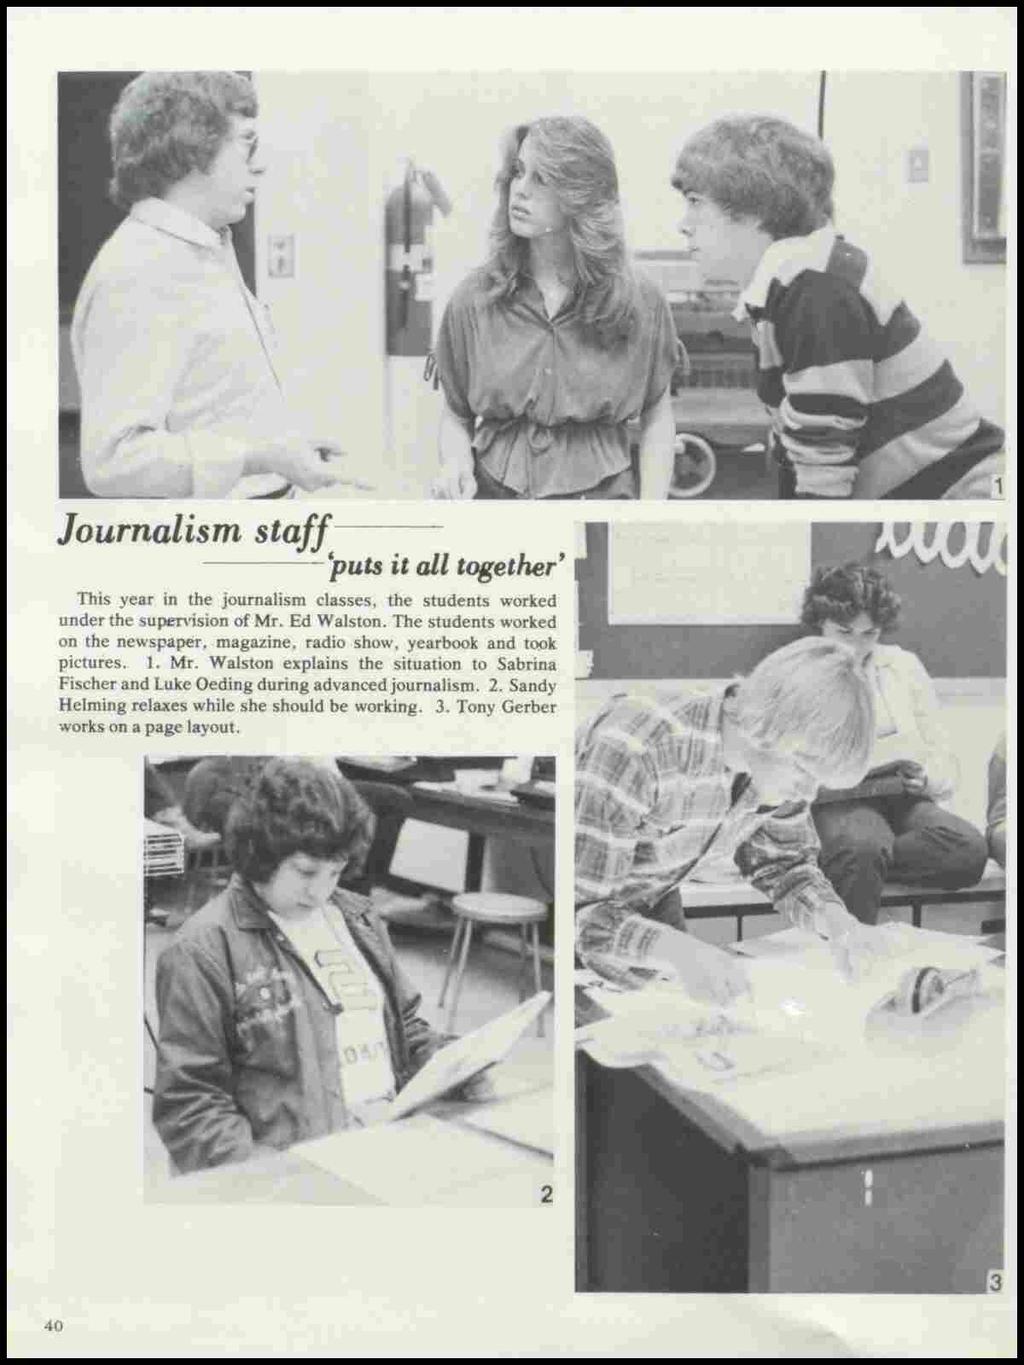 Journalism staff ----'puts it all together' This year in the journalism classes, the students worked under the supervision of Mr. Ed Walston.